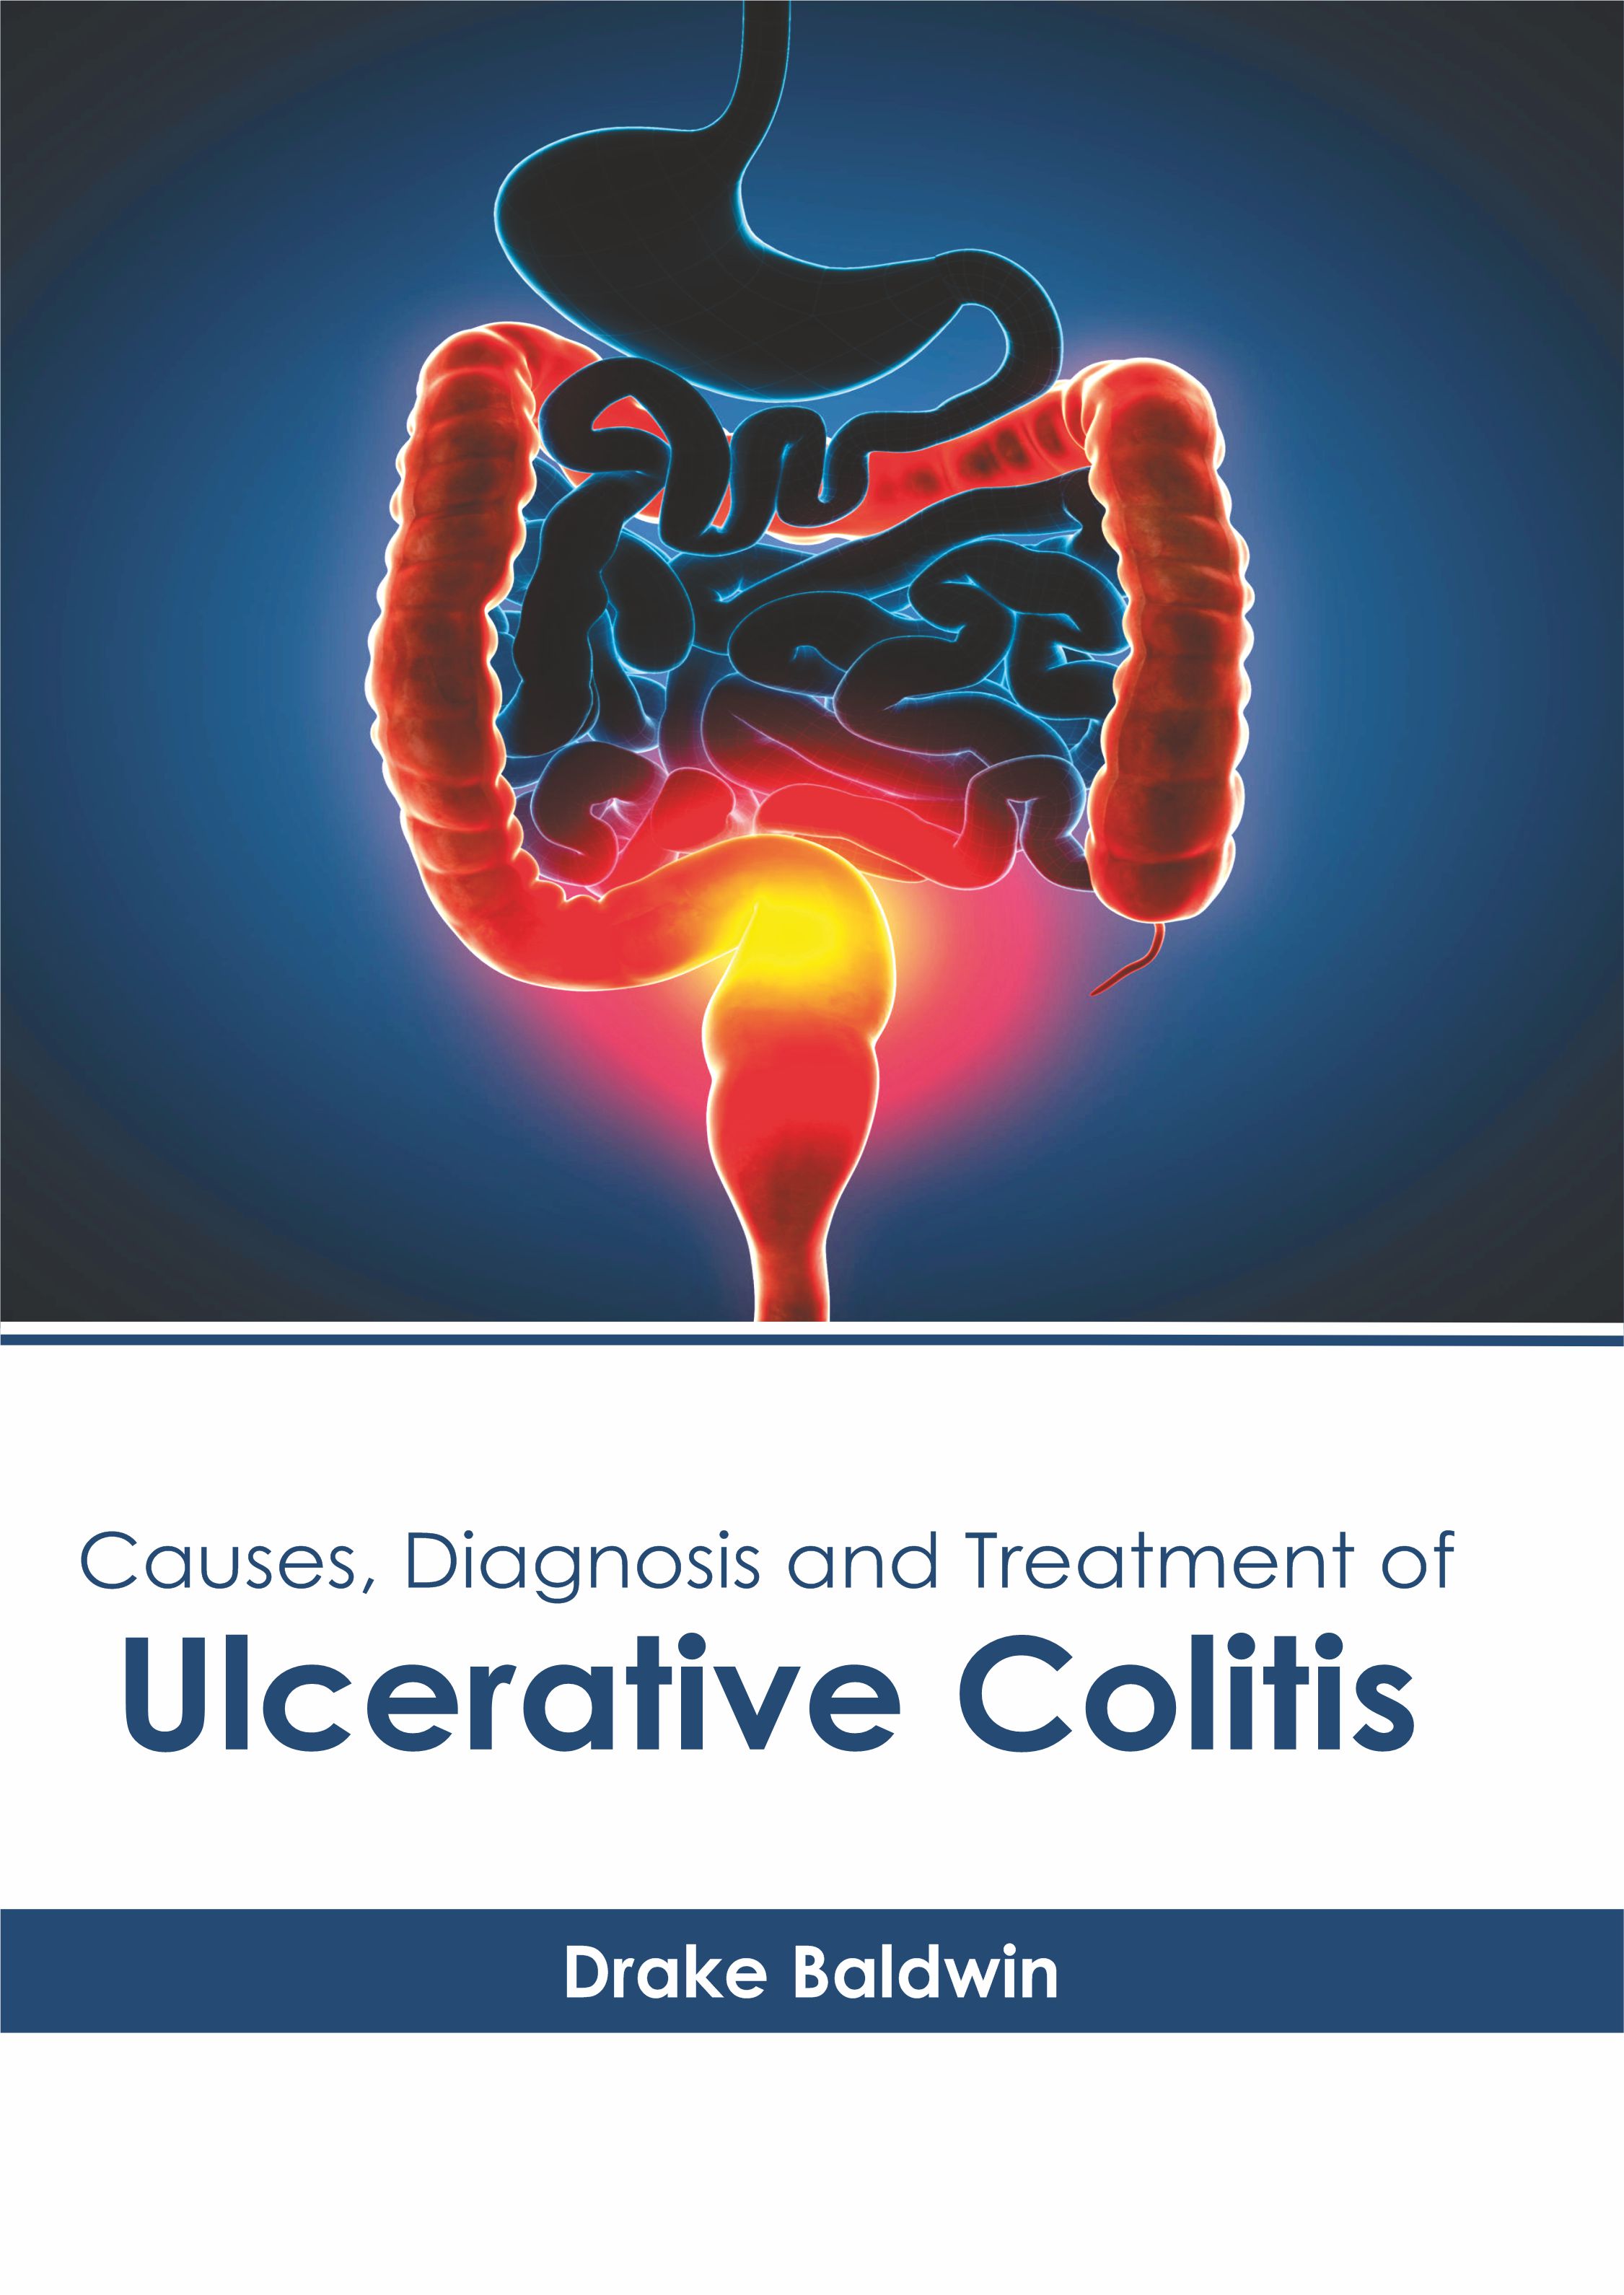 Causes, Diagnosis and Treatment of Ulcerative Colitis